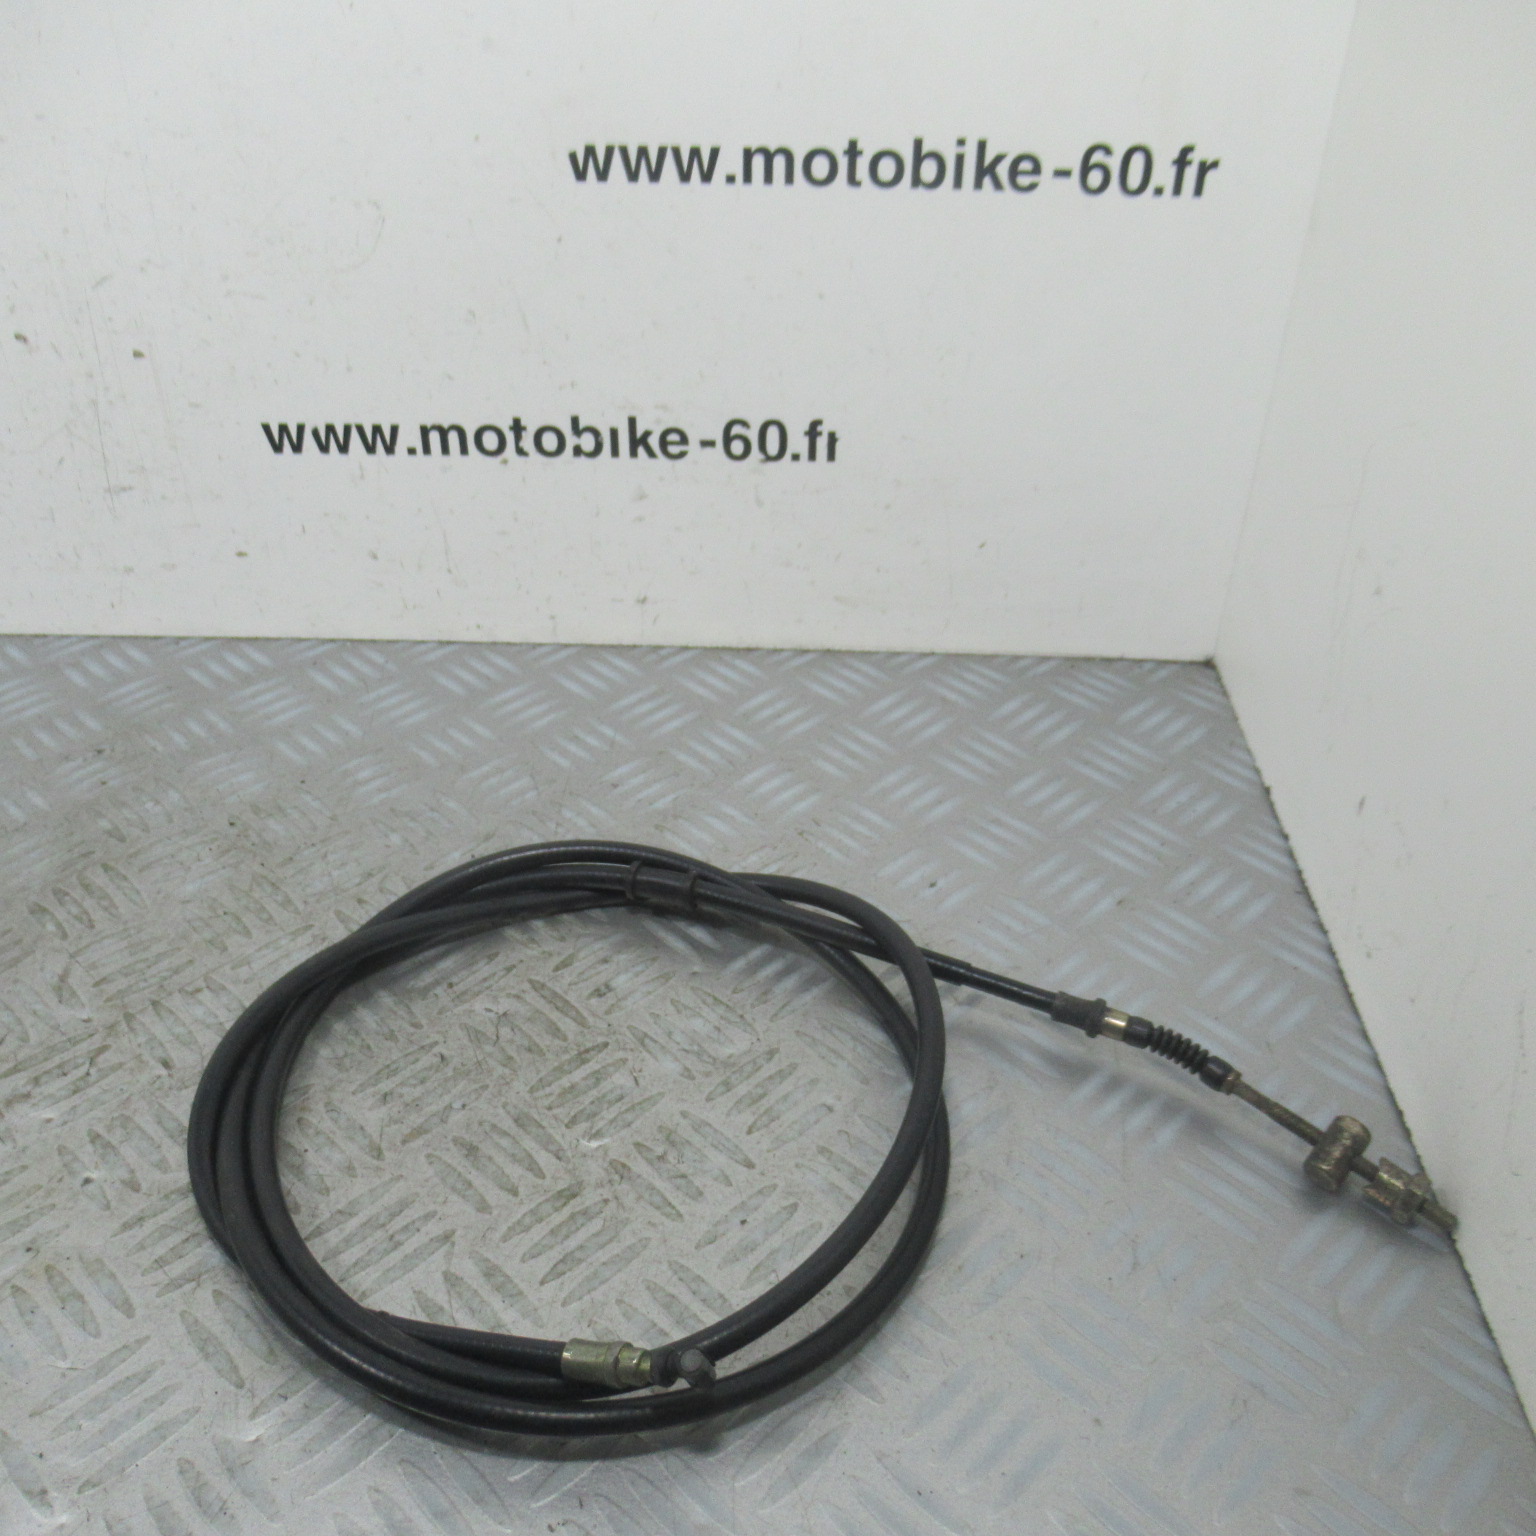 Cable frein arriere Kymco Agility 50 4t